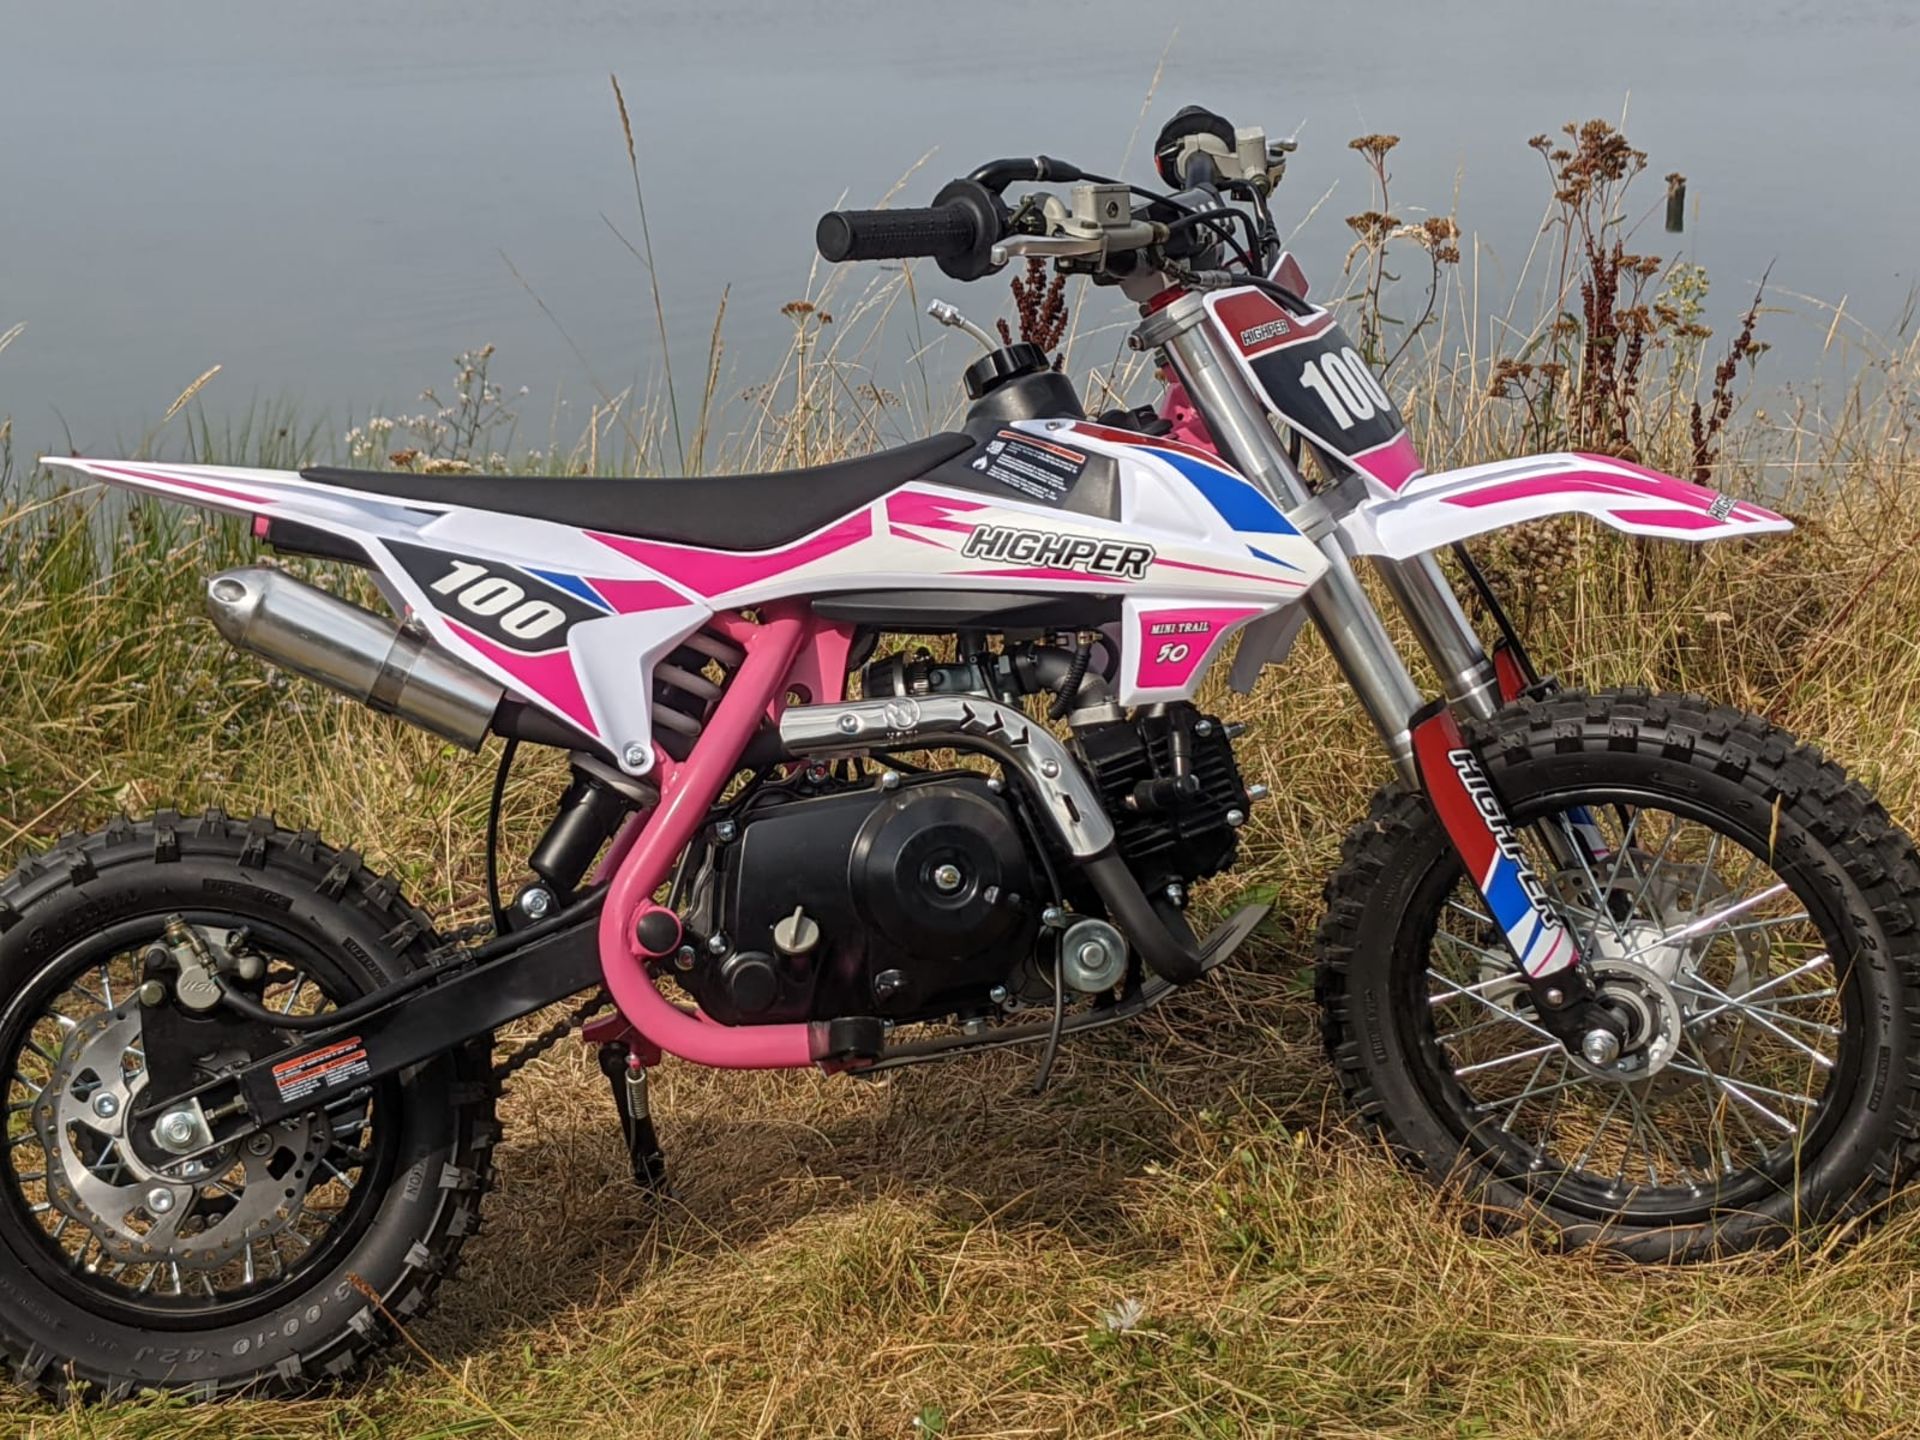 MBO 70cc Pit Bike with Larger 10" Wheels and Electric start 2022 Version - Pink - Image 2 of 4